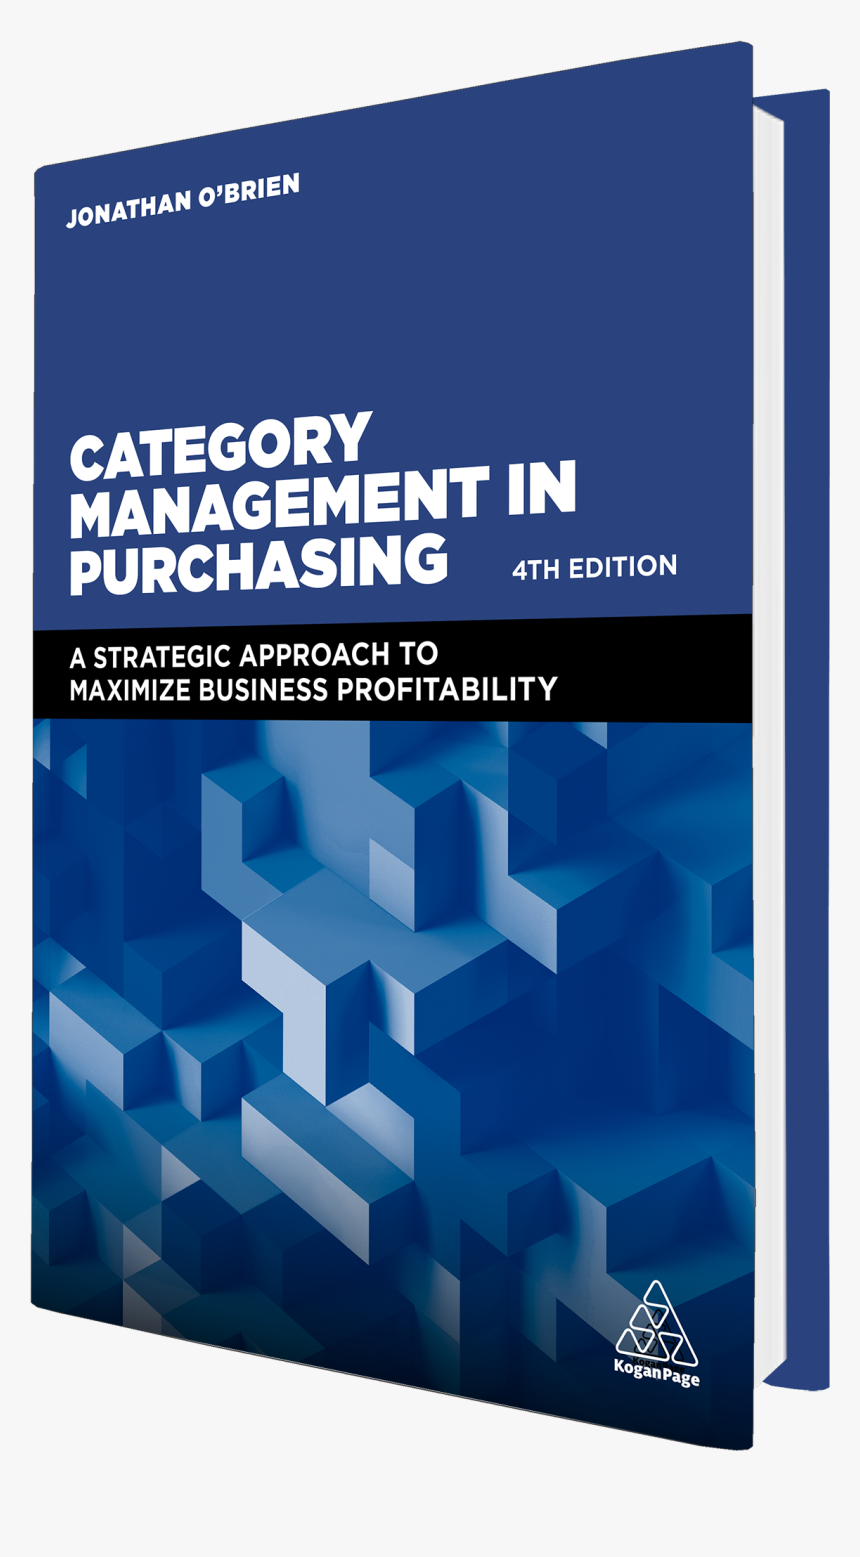 Cat Man Book Upright 300ppi - Category Management In Purchasing, HD Png Download, Free Download